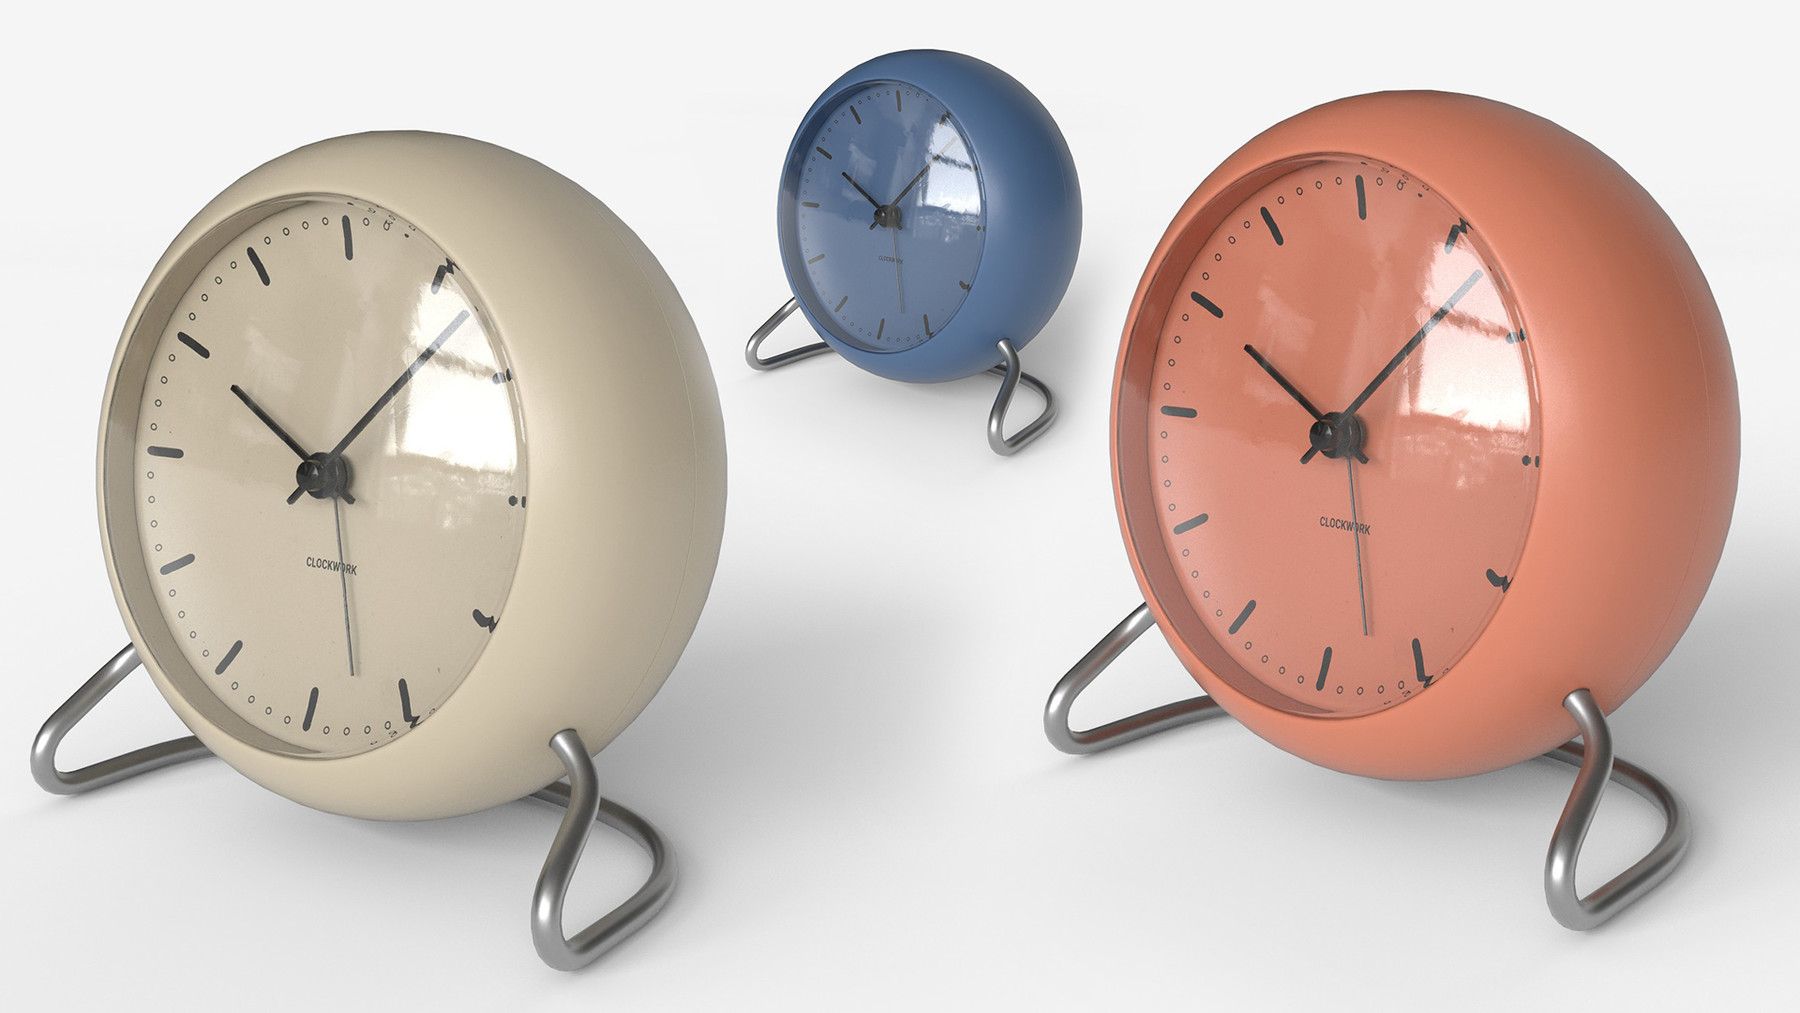 ArtStation - Low-poly PBR Table Clock set - 001 | Resources